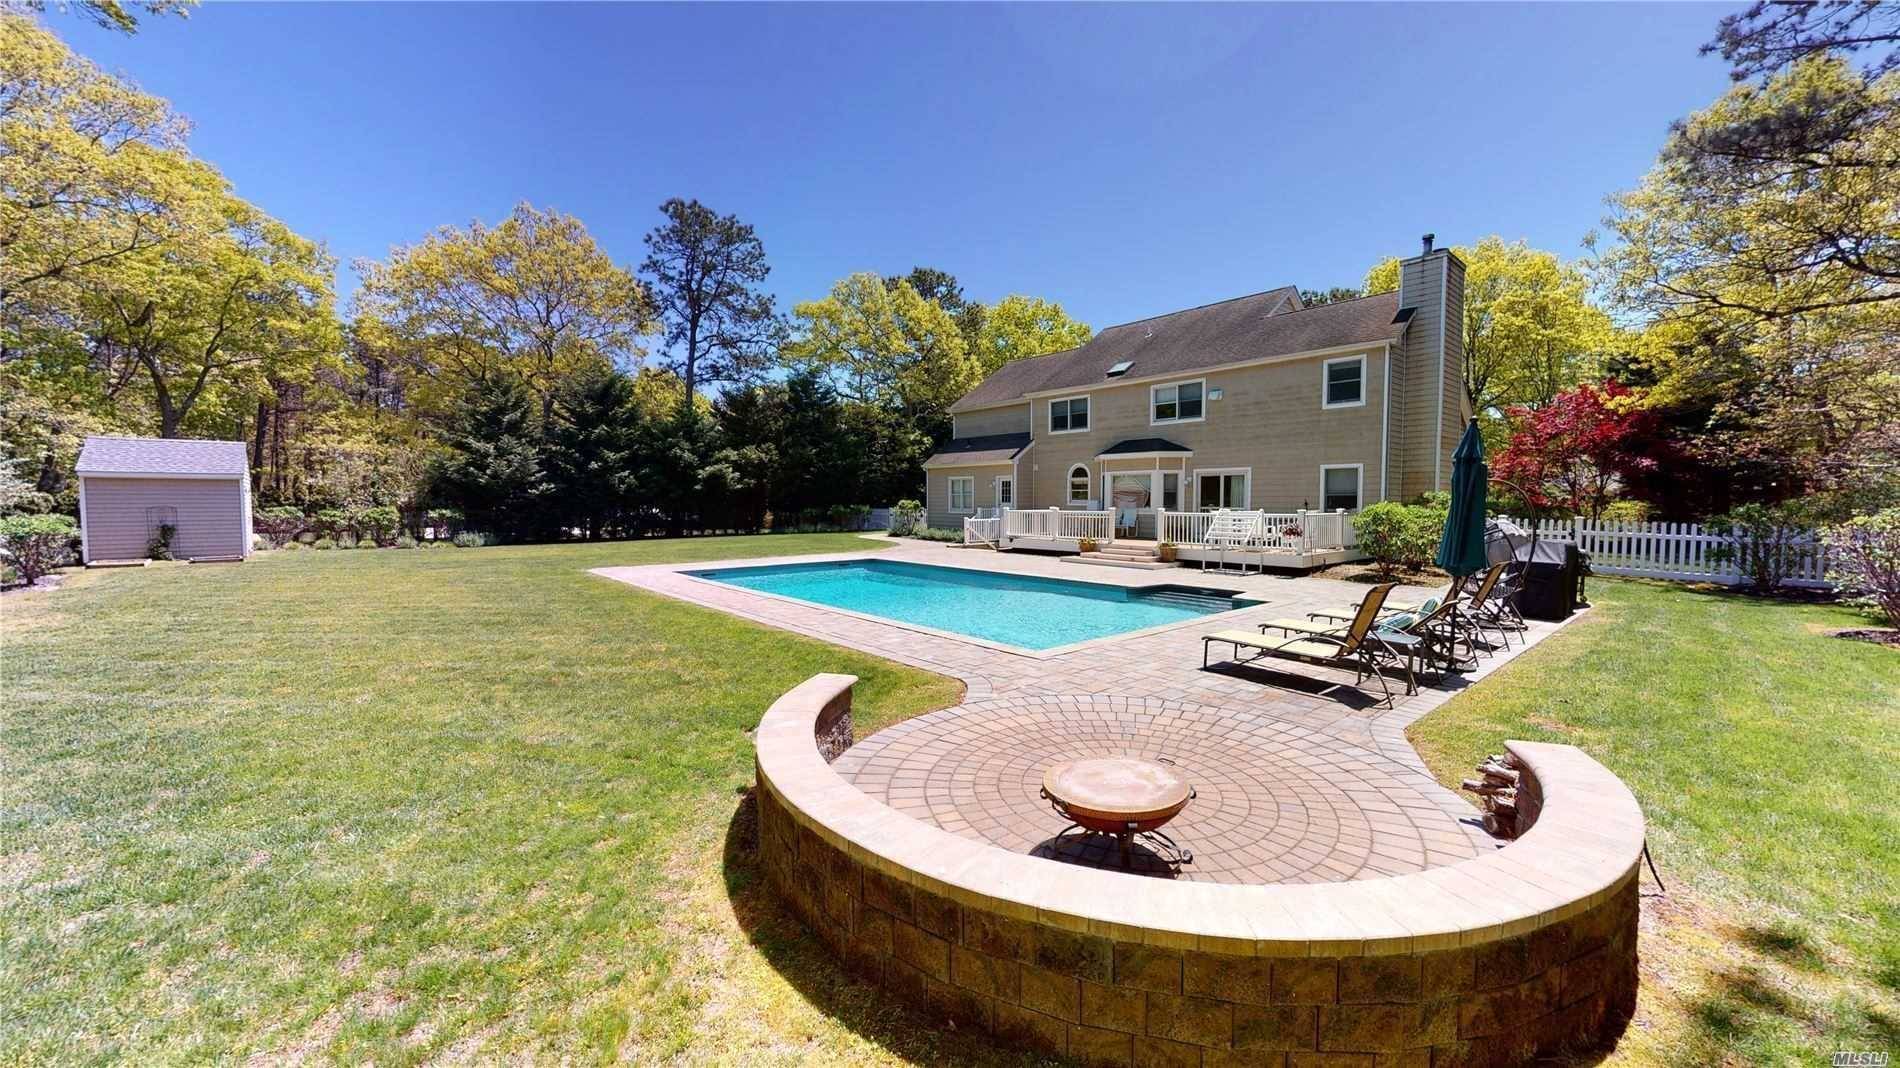 This 5 bedroom, 3 Bath completely updated Post Modern is the perfect Hampton's getaway.